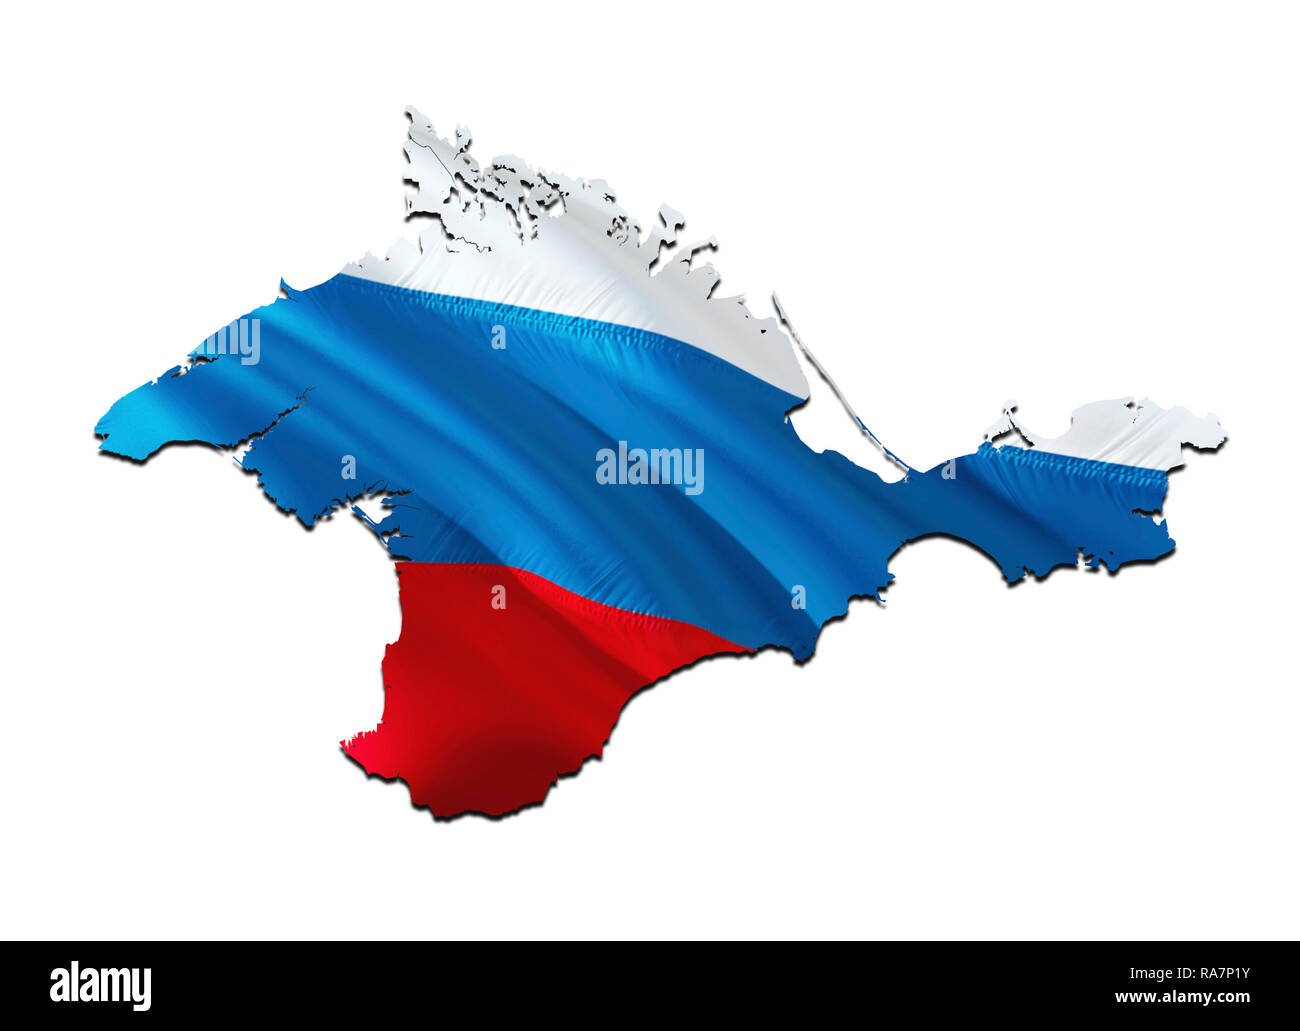 Flag Map of Crimea. 3D rendering Russia Crimea map and flag. The national symbol of Crimea. National waving Russian flag colorful concept 3D pattern b Stock Photo